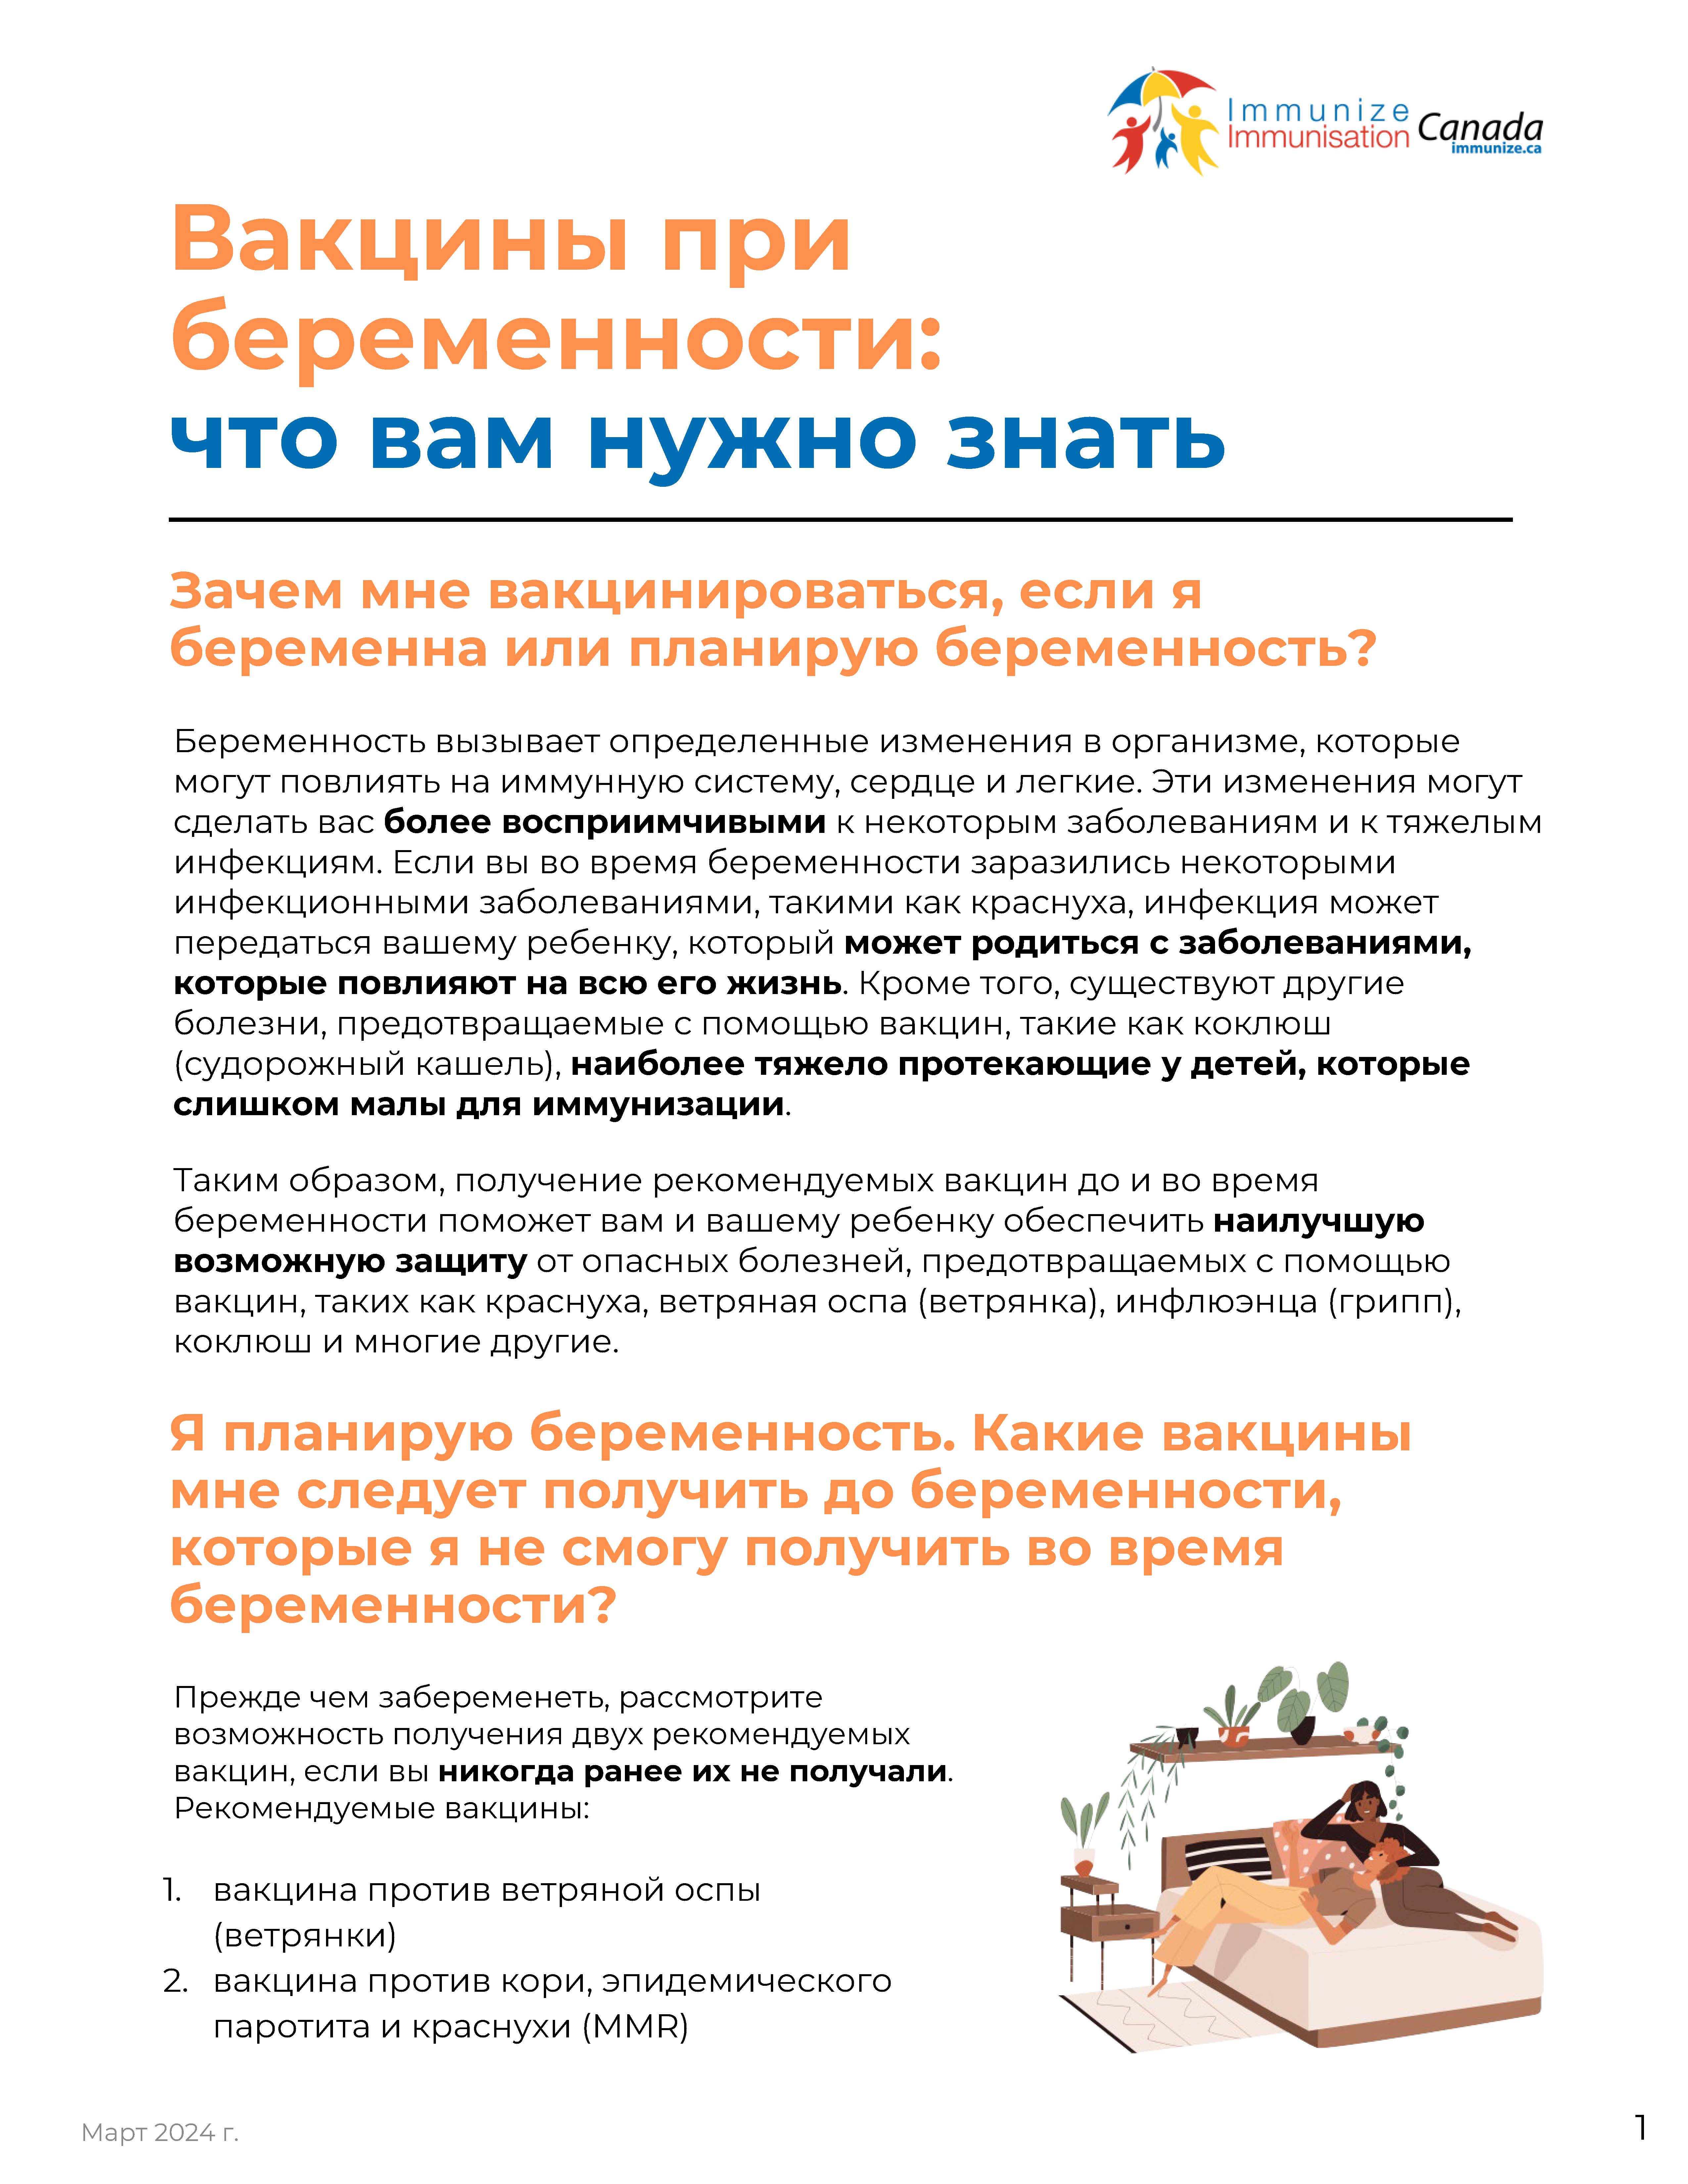 Vaccines in Pregnancy: What you need to know (factsheet in Russian)